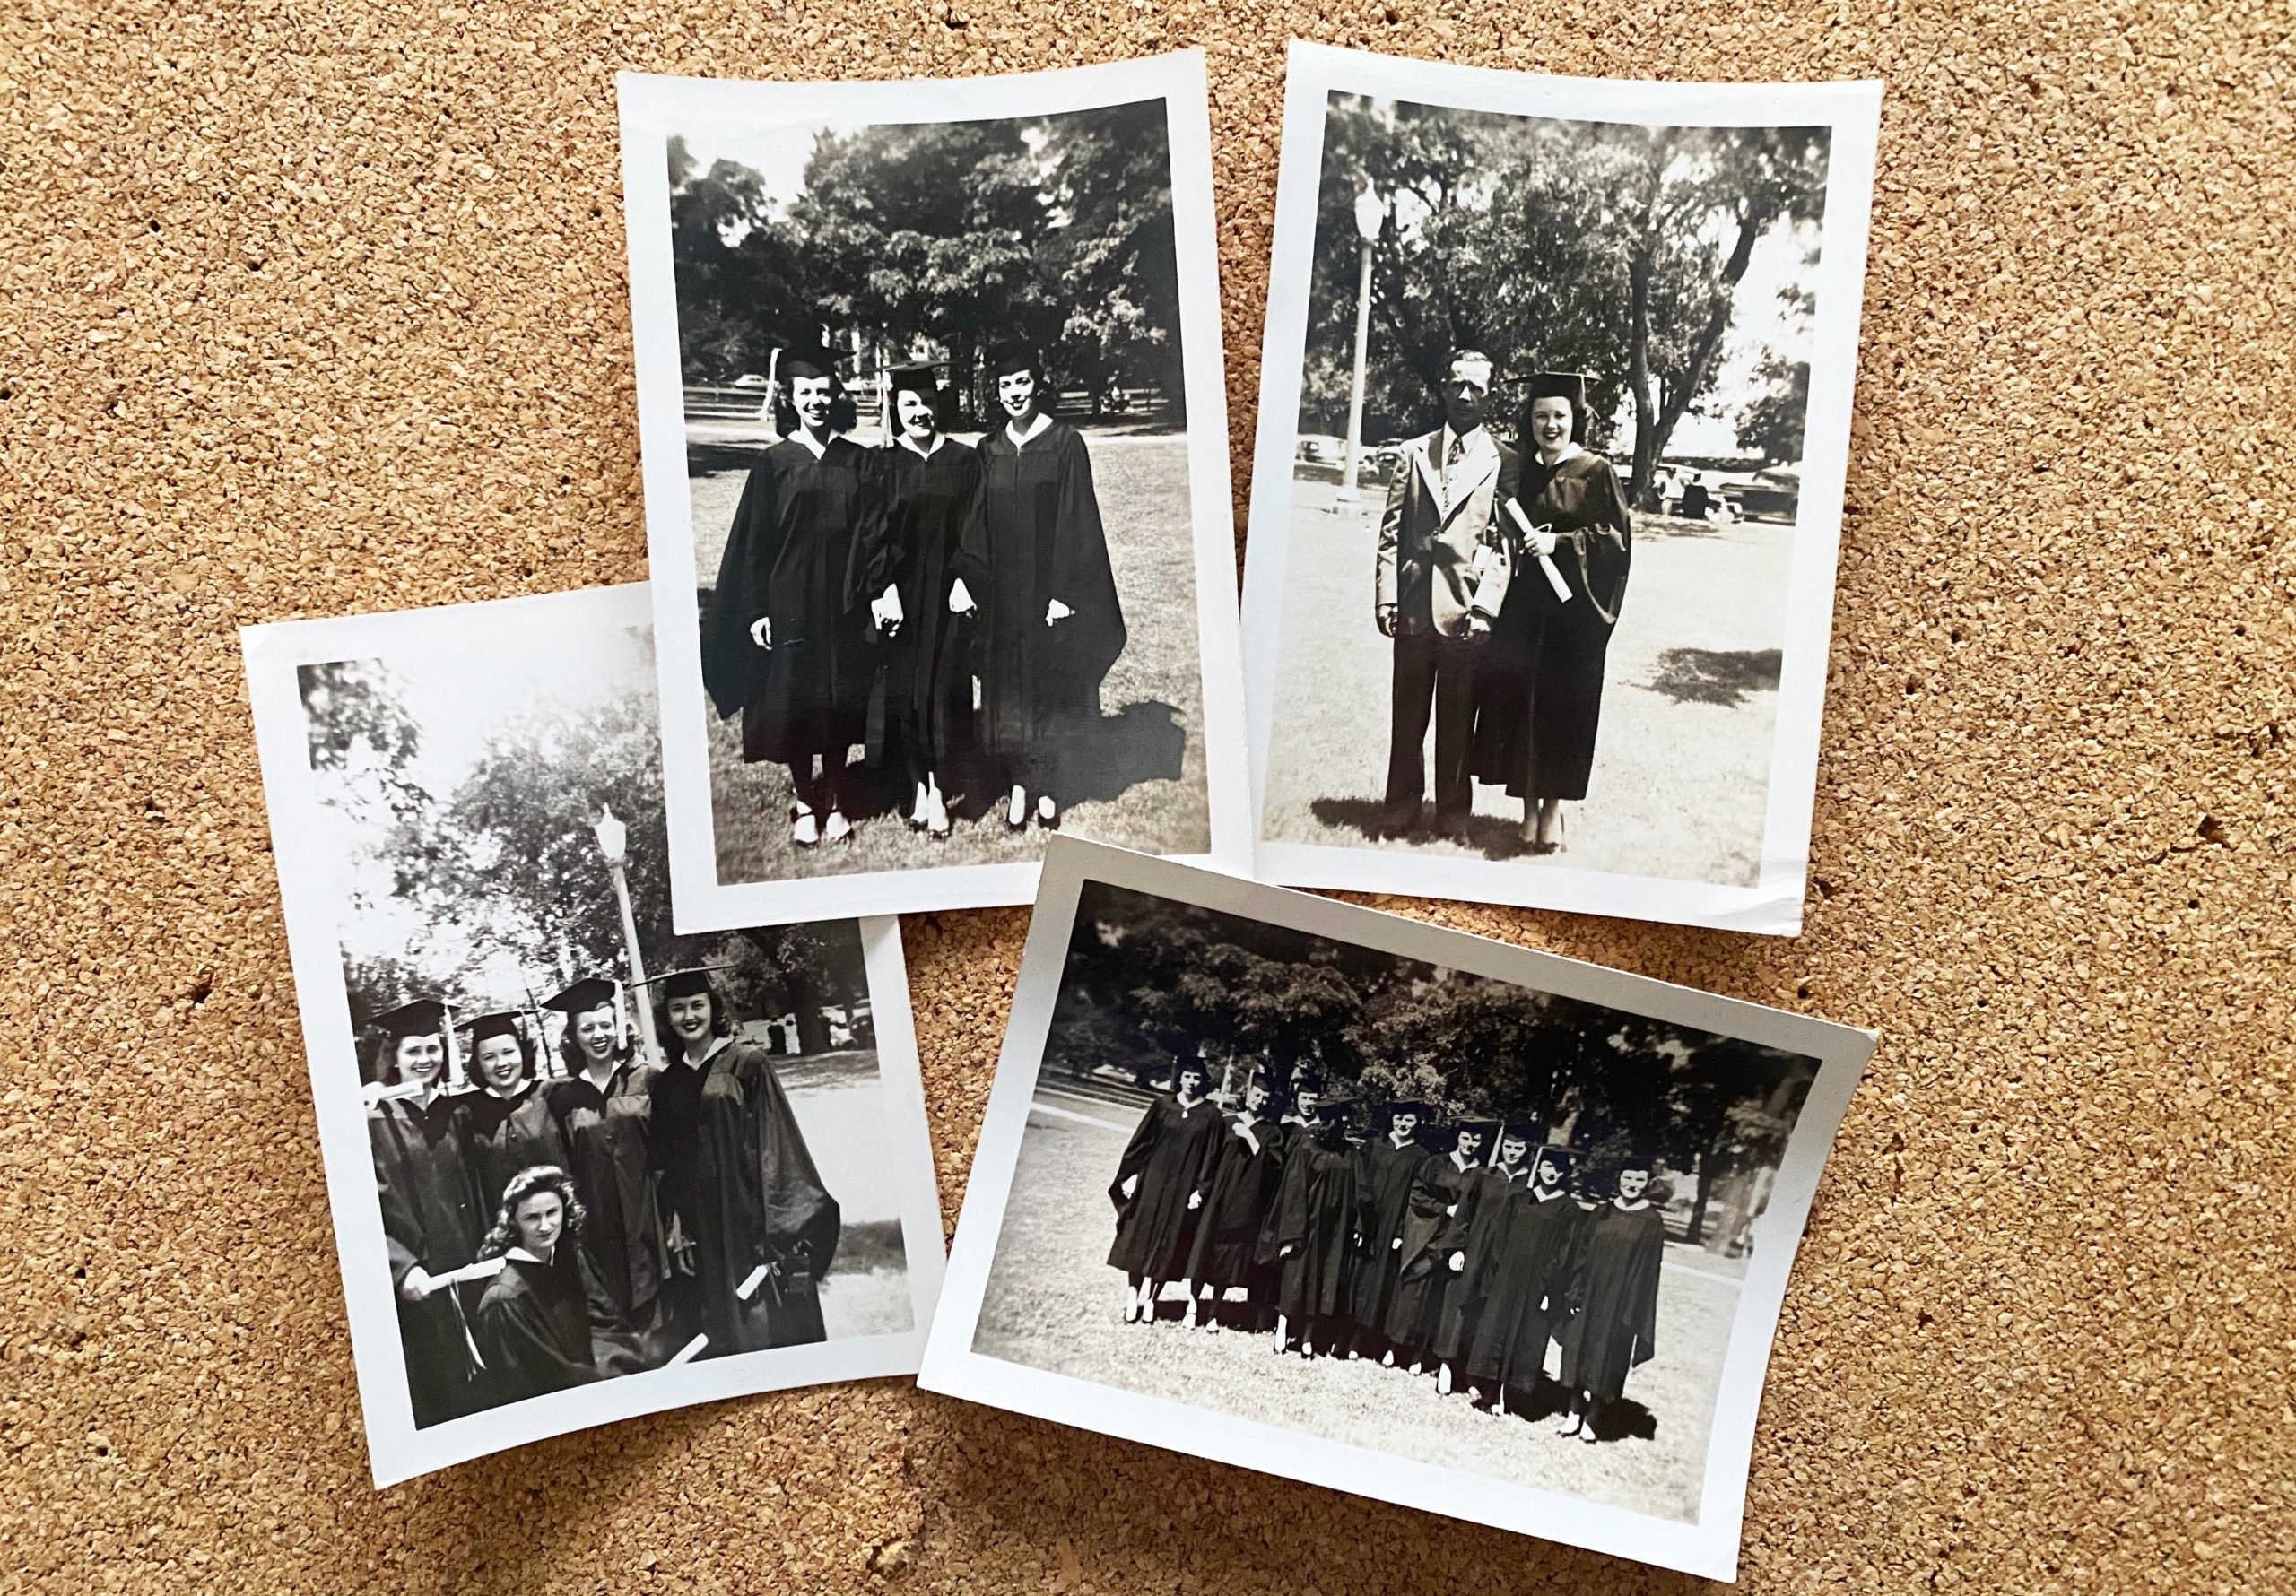 Collage of Baylor graduation photos from the 1940s